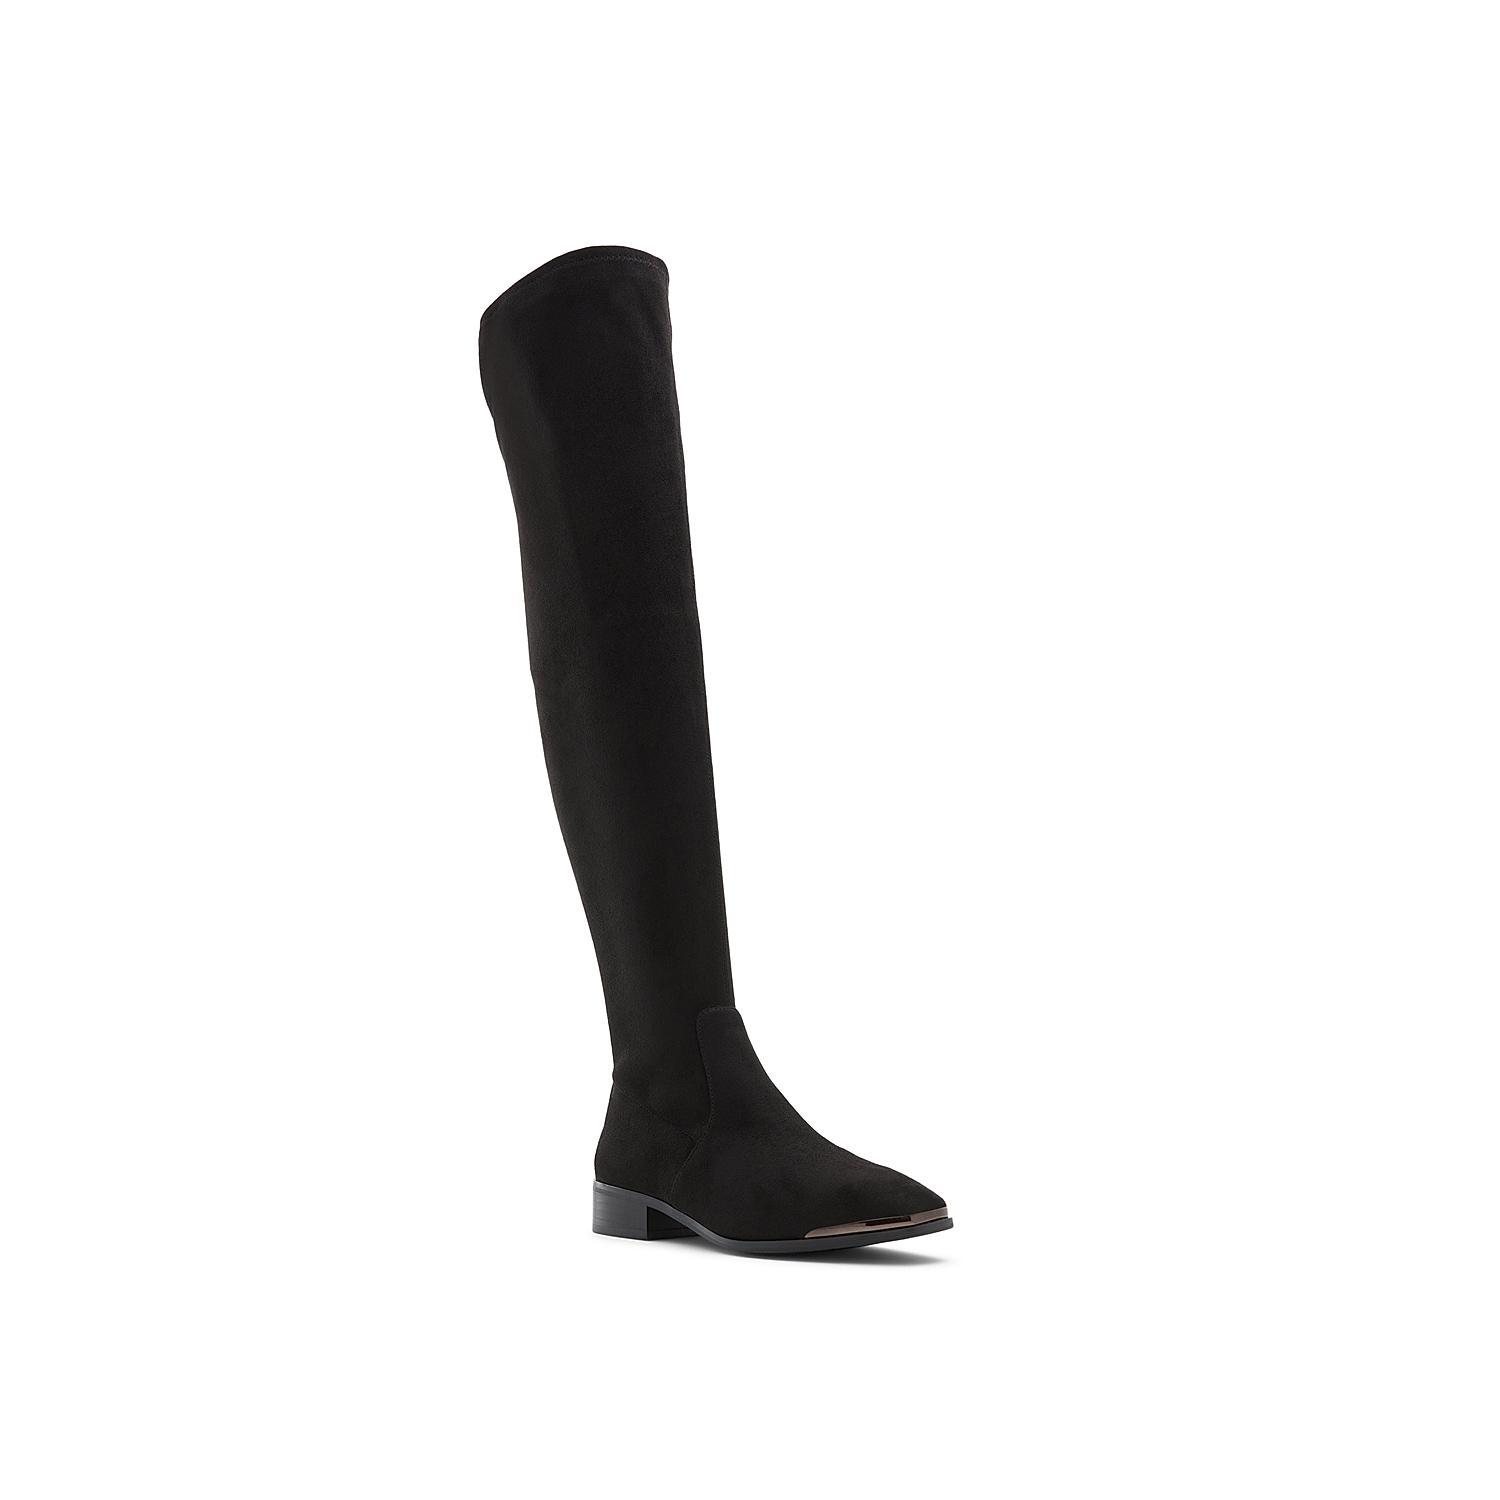 ALDO Sevaunna Over the Knee Boot Product Image